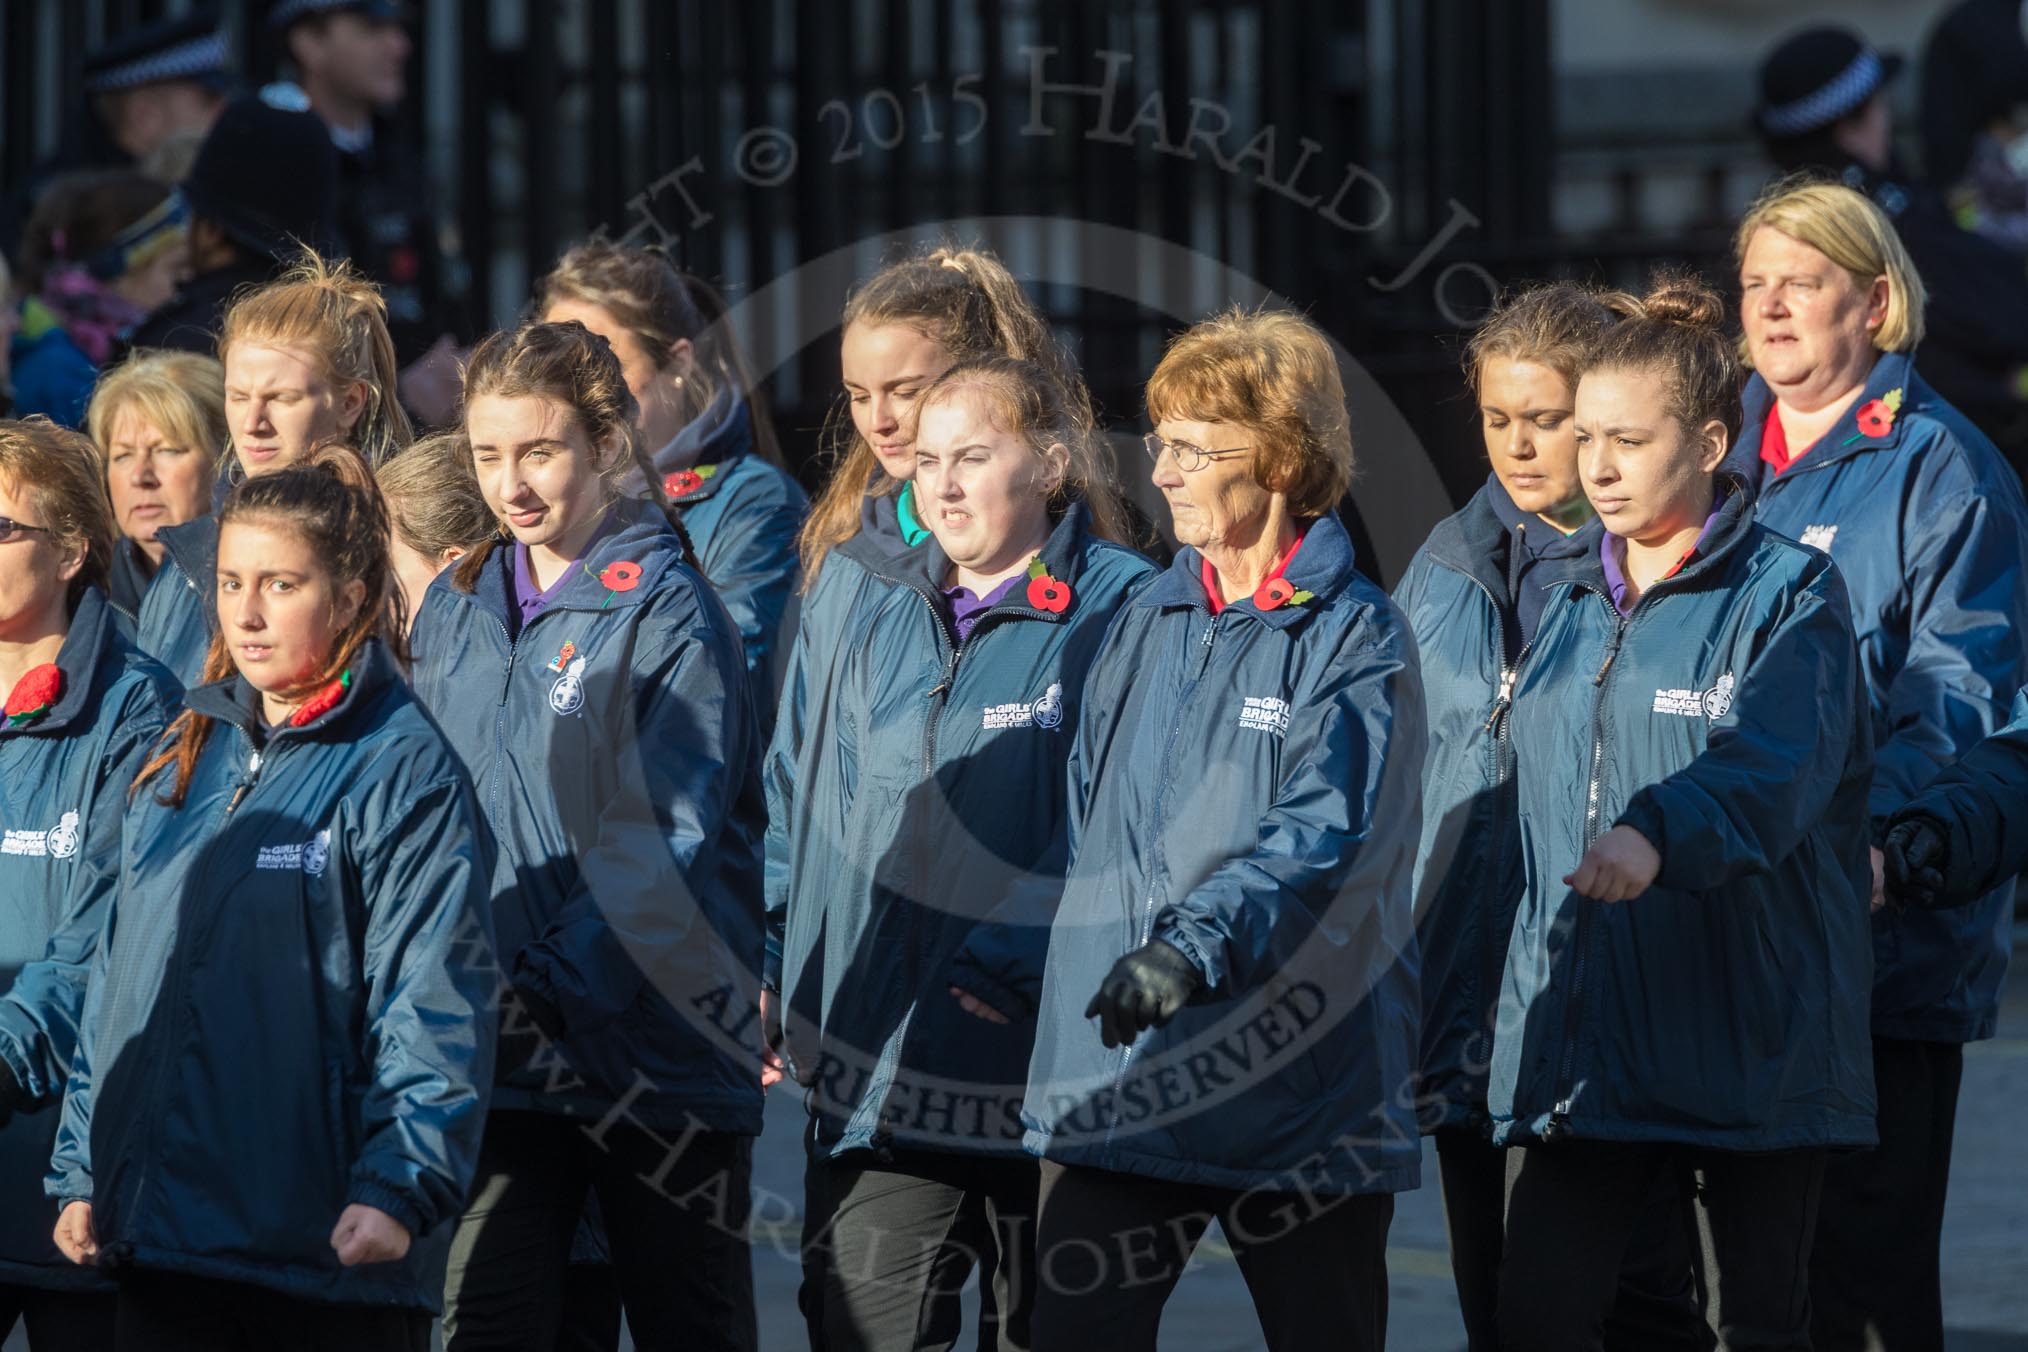 March Past, Remembrance Sunday at the Cenotaph 2016: M35 Girls Brigade England & Wales.
Cenotaph, Whitehall, London SW1,
London,
Greater London,
United Kingdom,
on 13 November 2016 at 13:18, image #2873